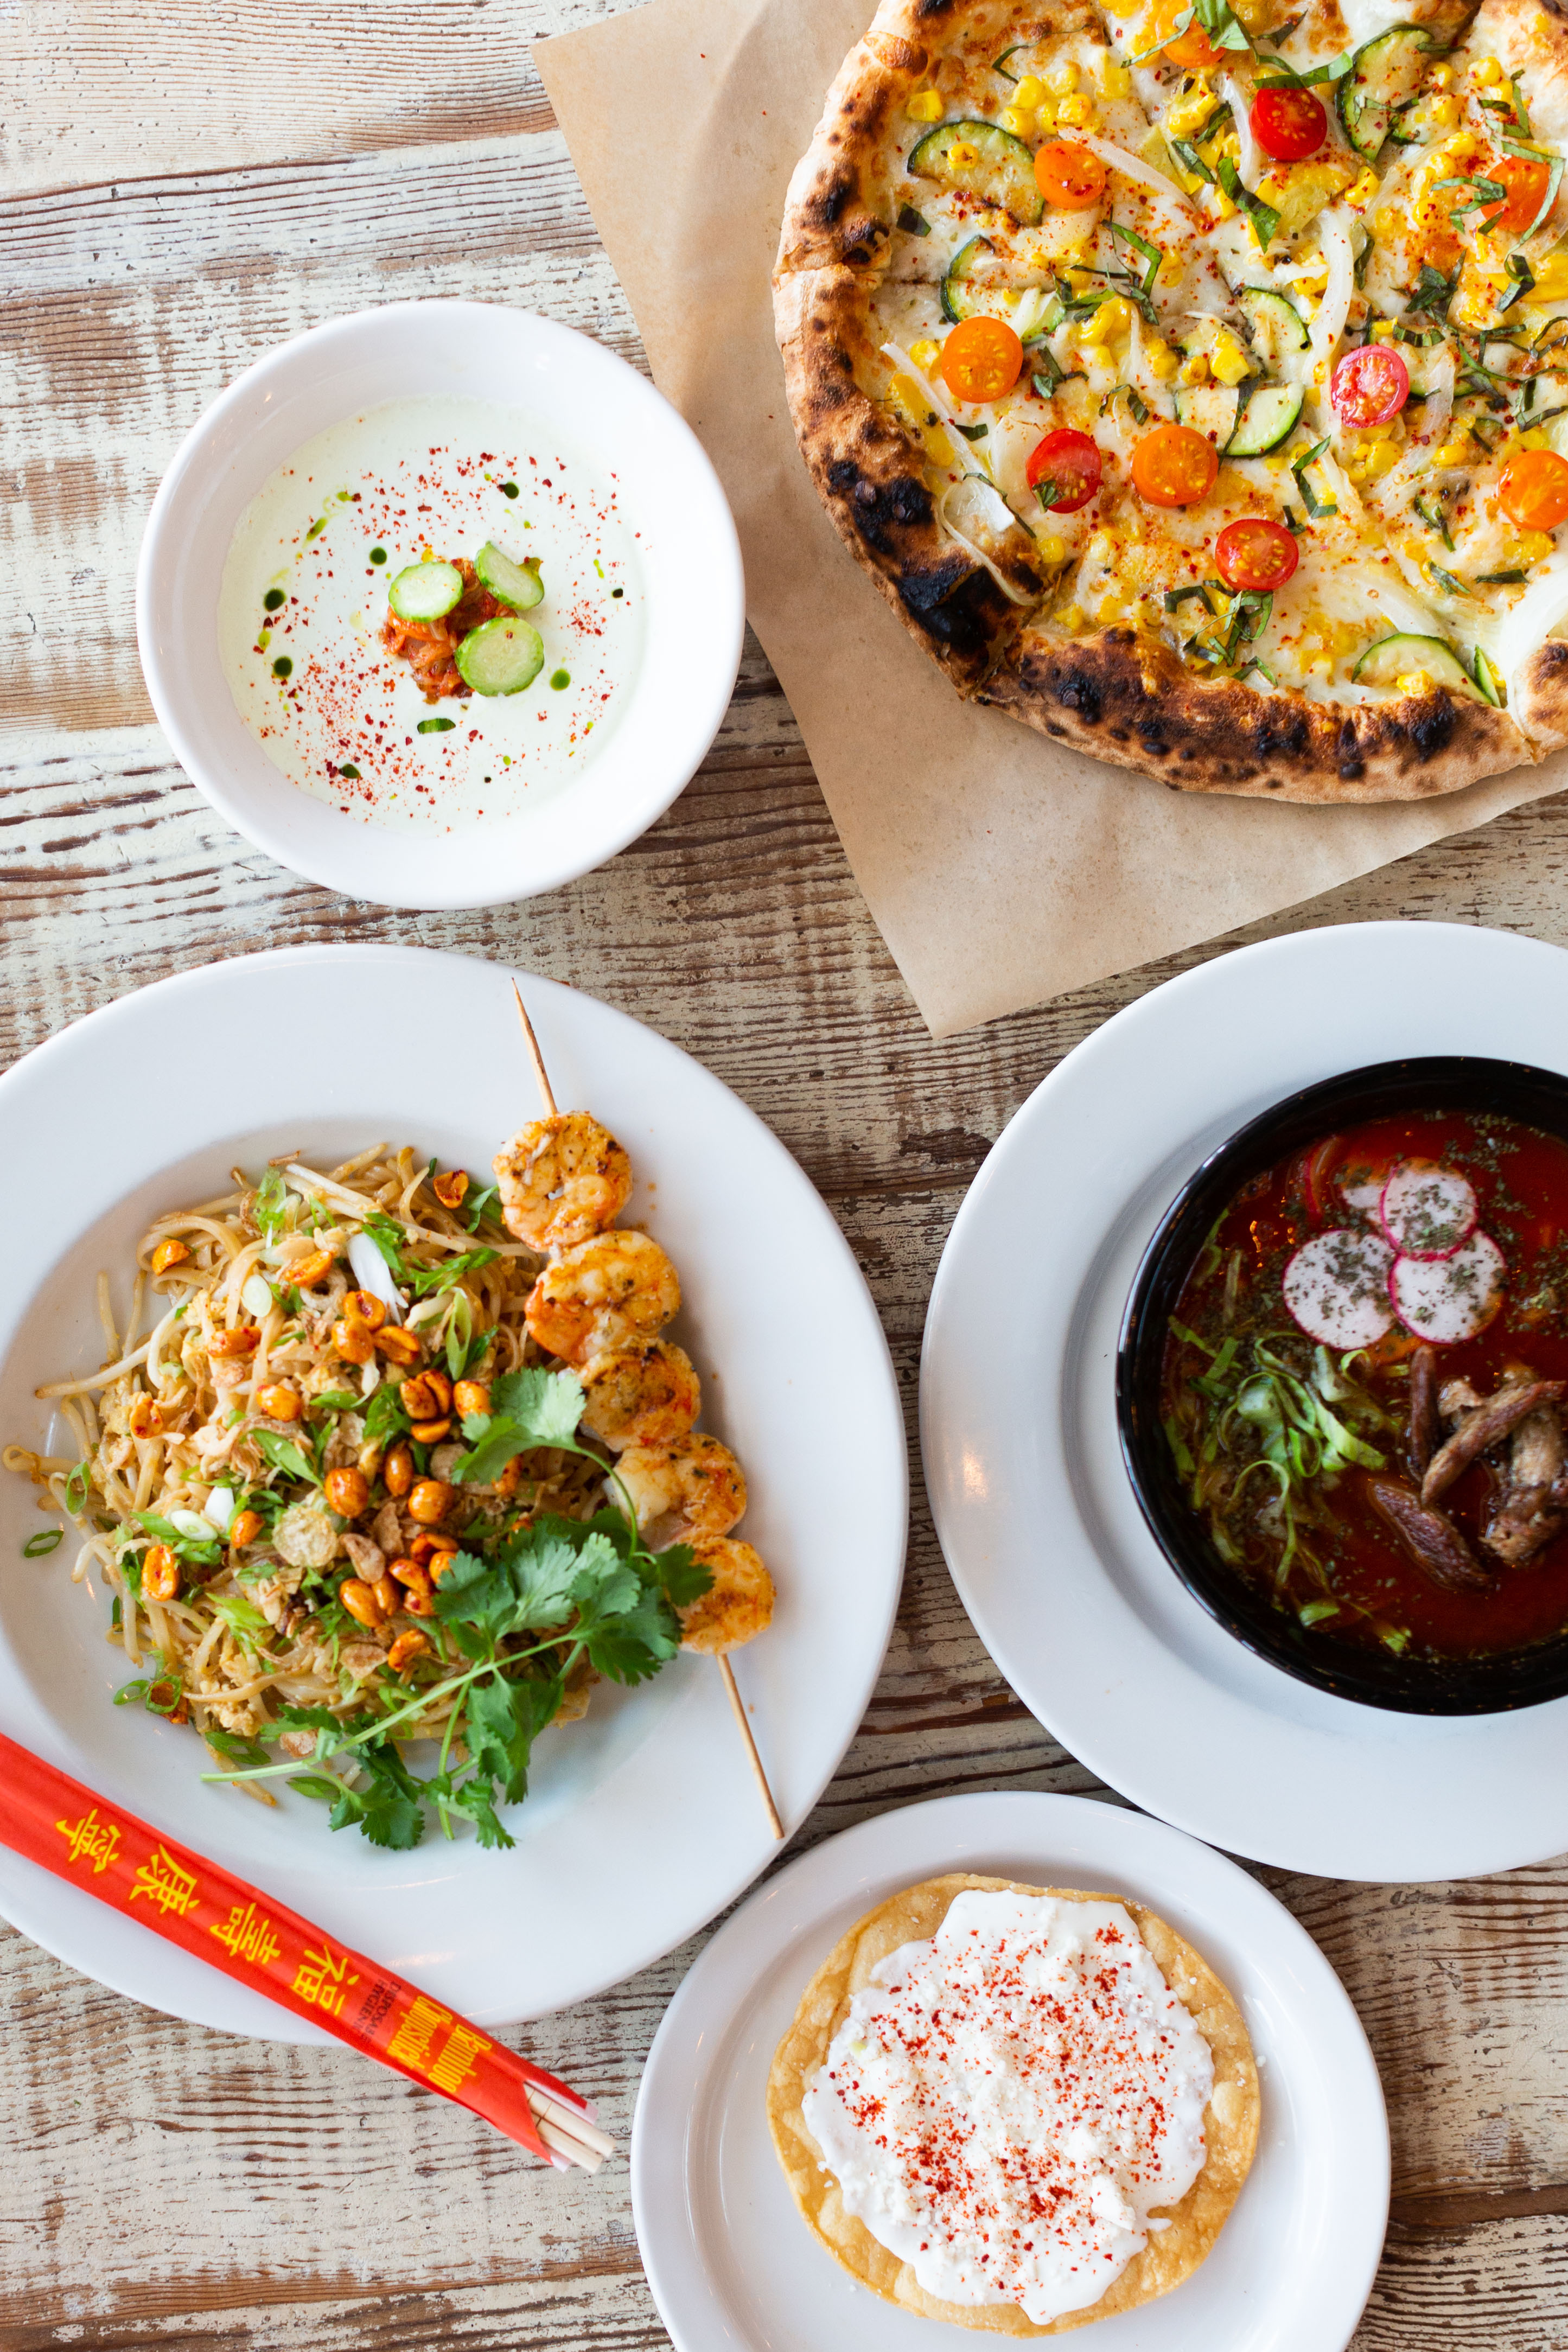 Favorite menu standards such as the Kitchen Door Mushroom Soup, the Bahn Mi Sandwich and Korean Style Ribs will be there for customers to enjoy.